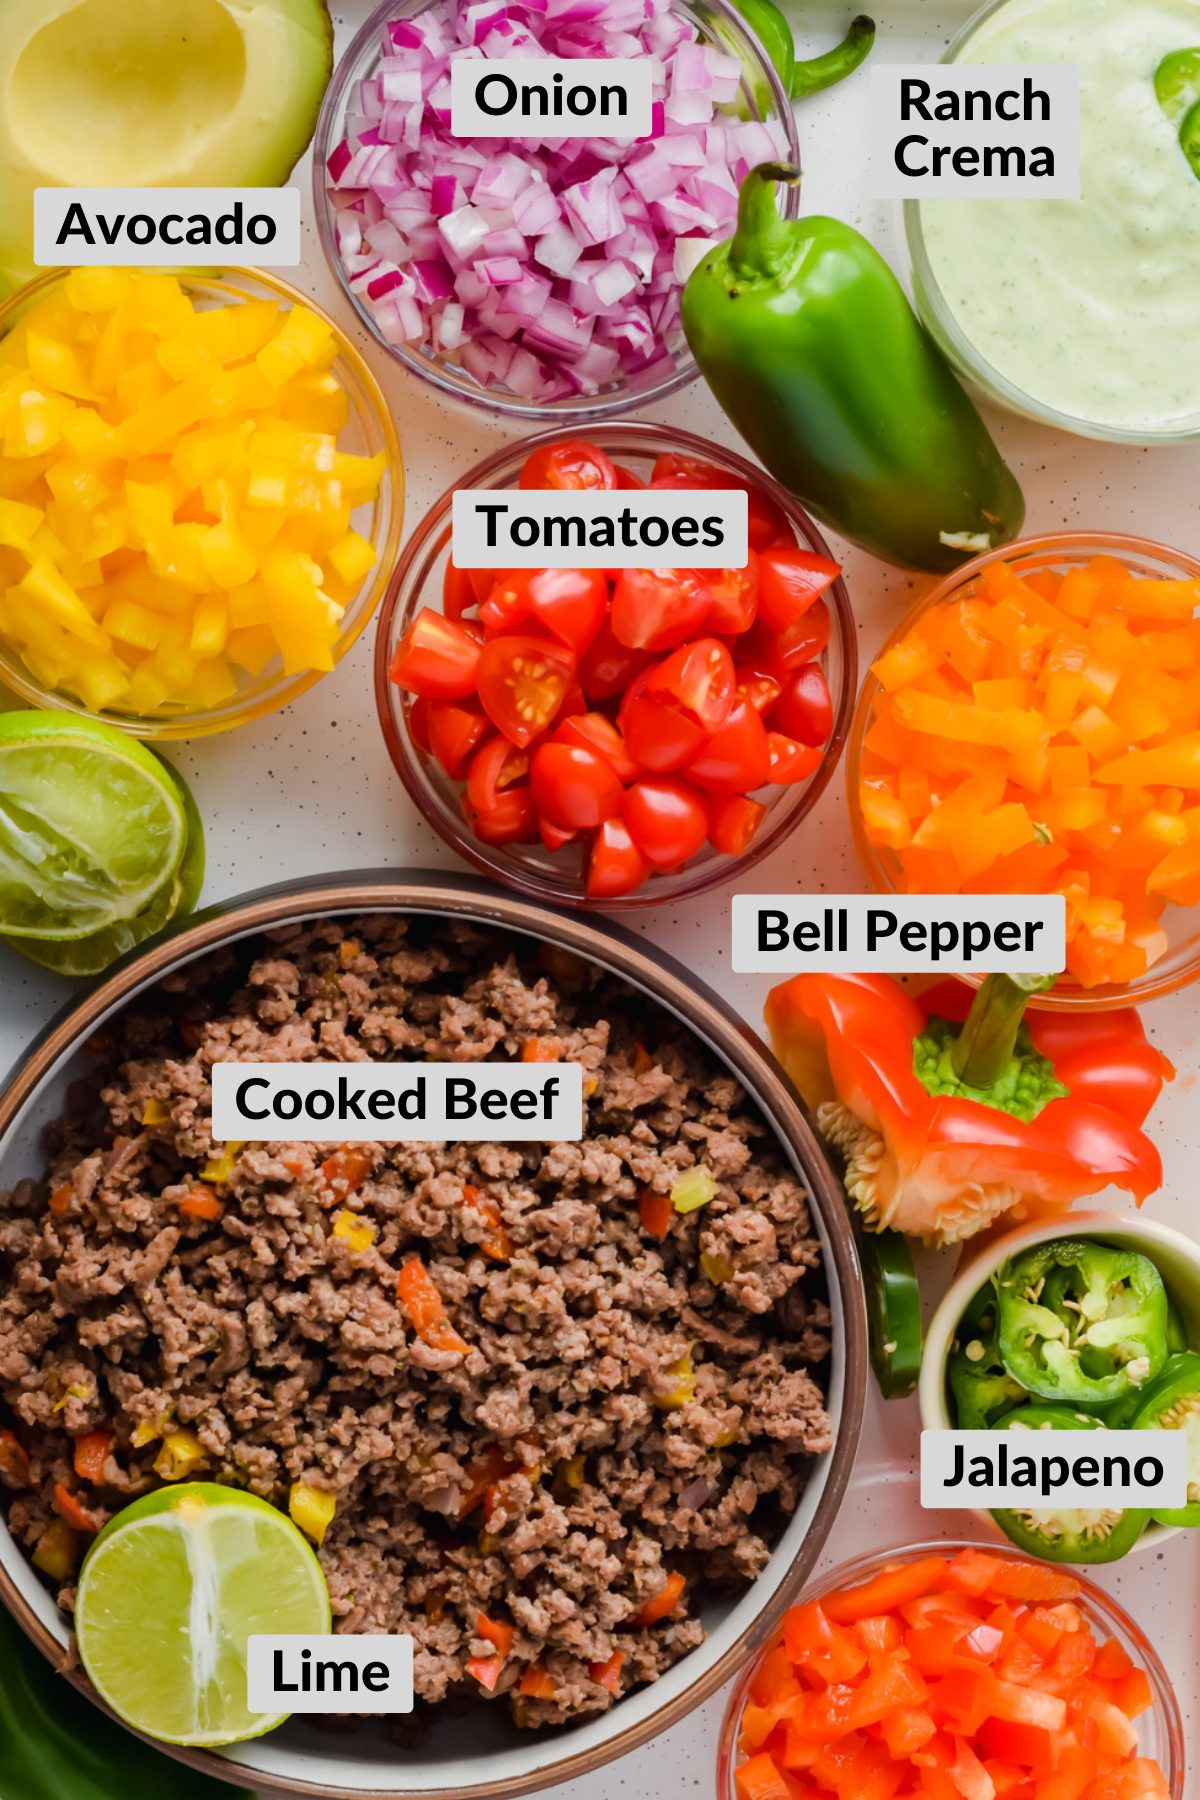 ingredients for ranch taco salad chopped up in individual bowls.